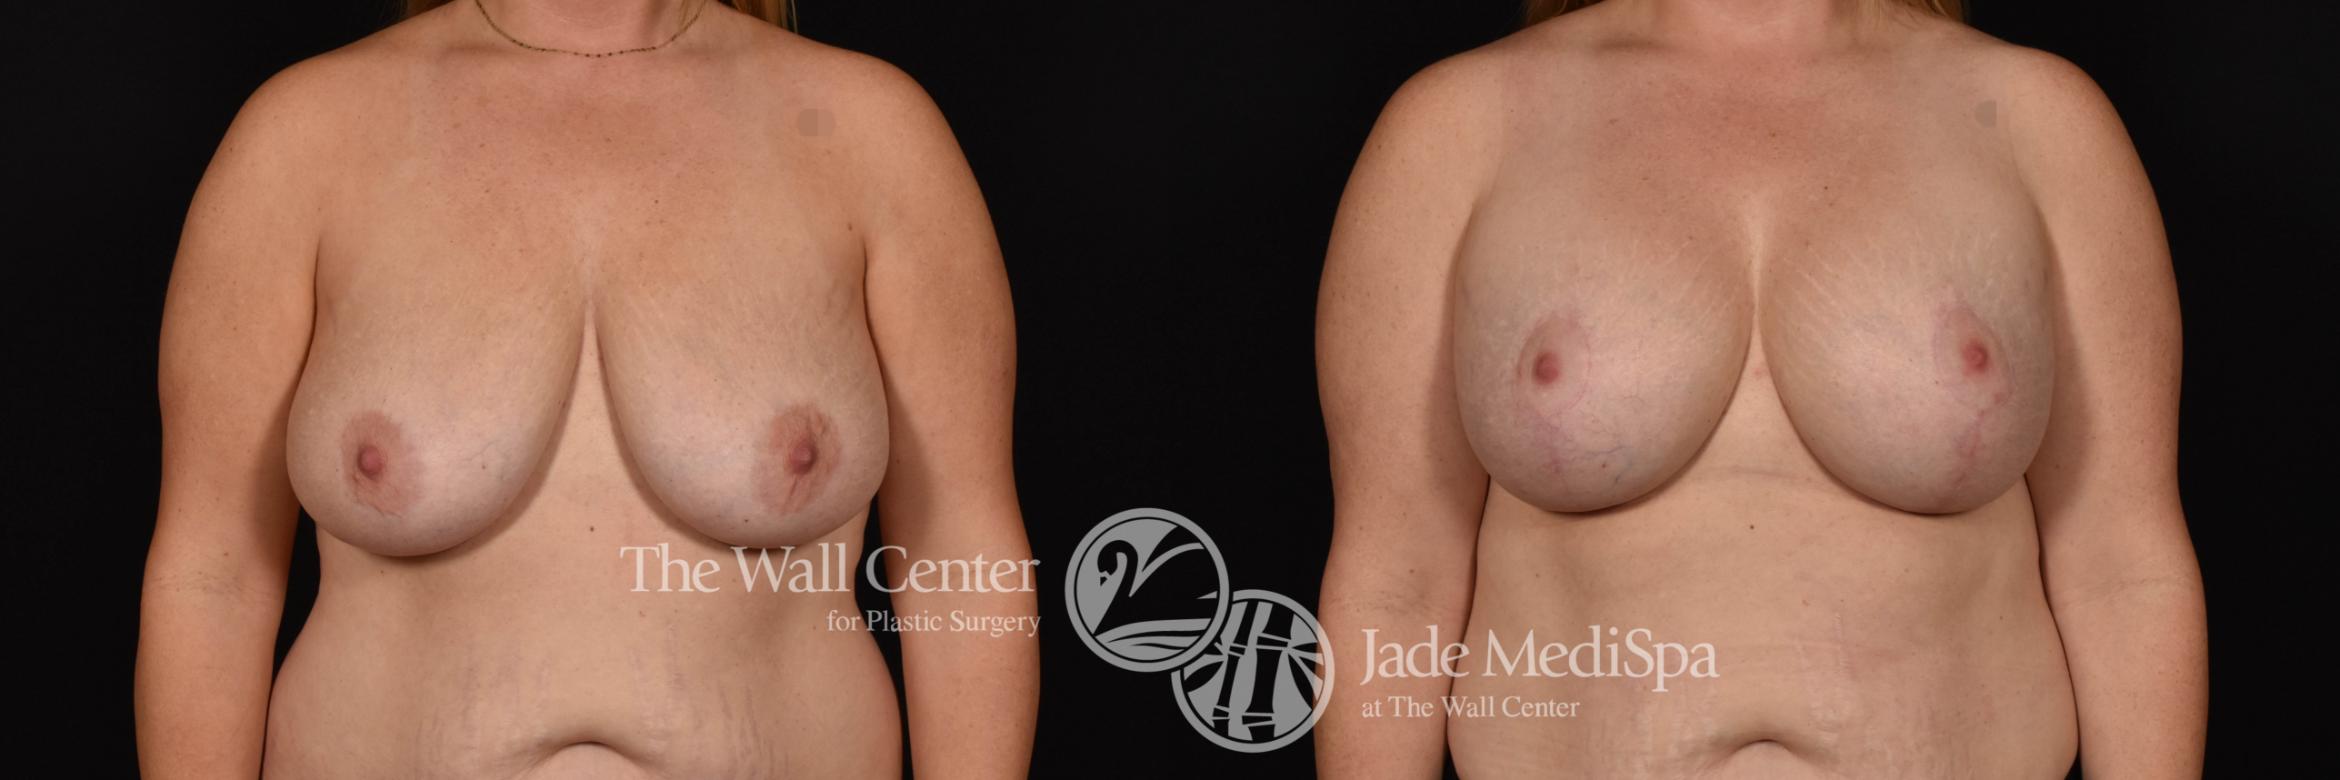 Breast Aug with Lift and SAFELipo to Axillae Front Photo, Shreveport, Louisiana, The Wall Center for Plastic Surgery, Case 941